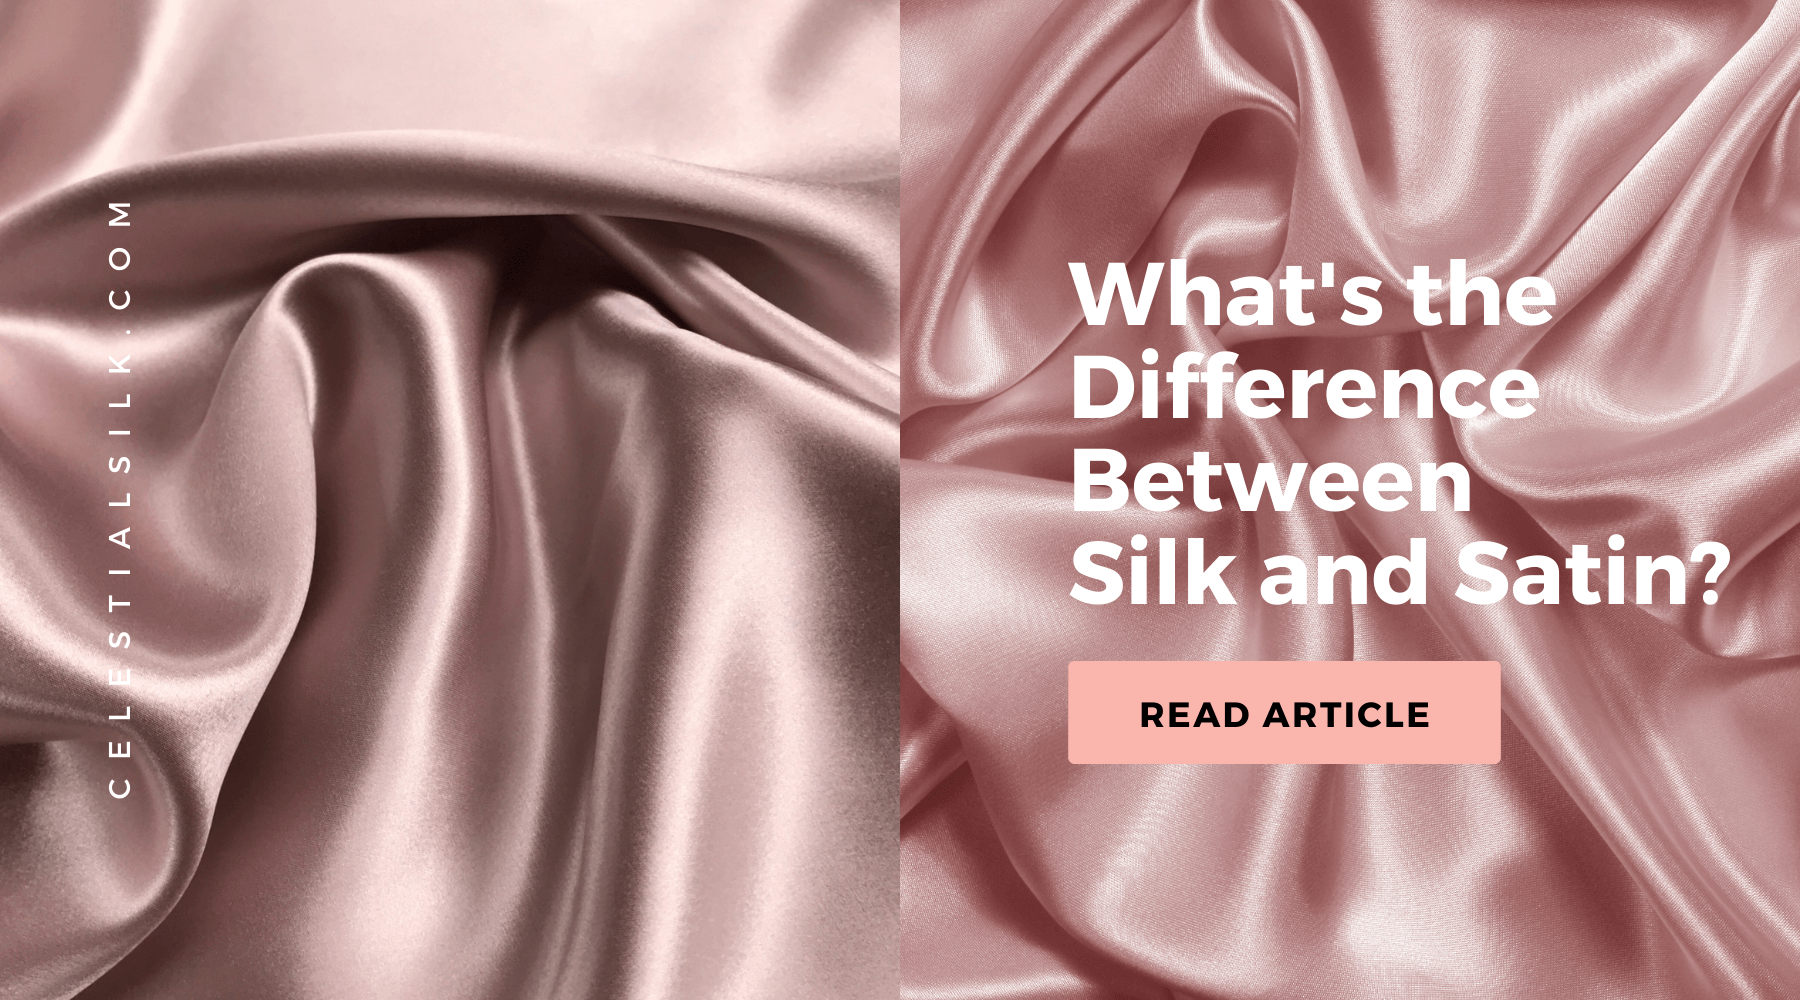 What’s the Difference Between Silk and Satin?